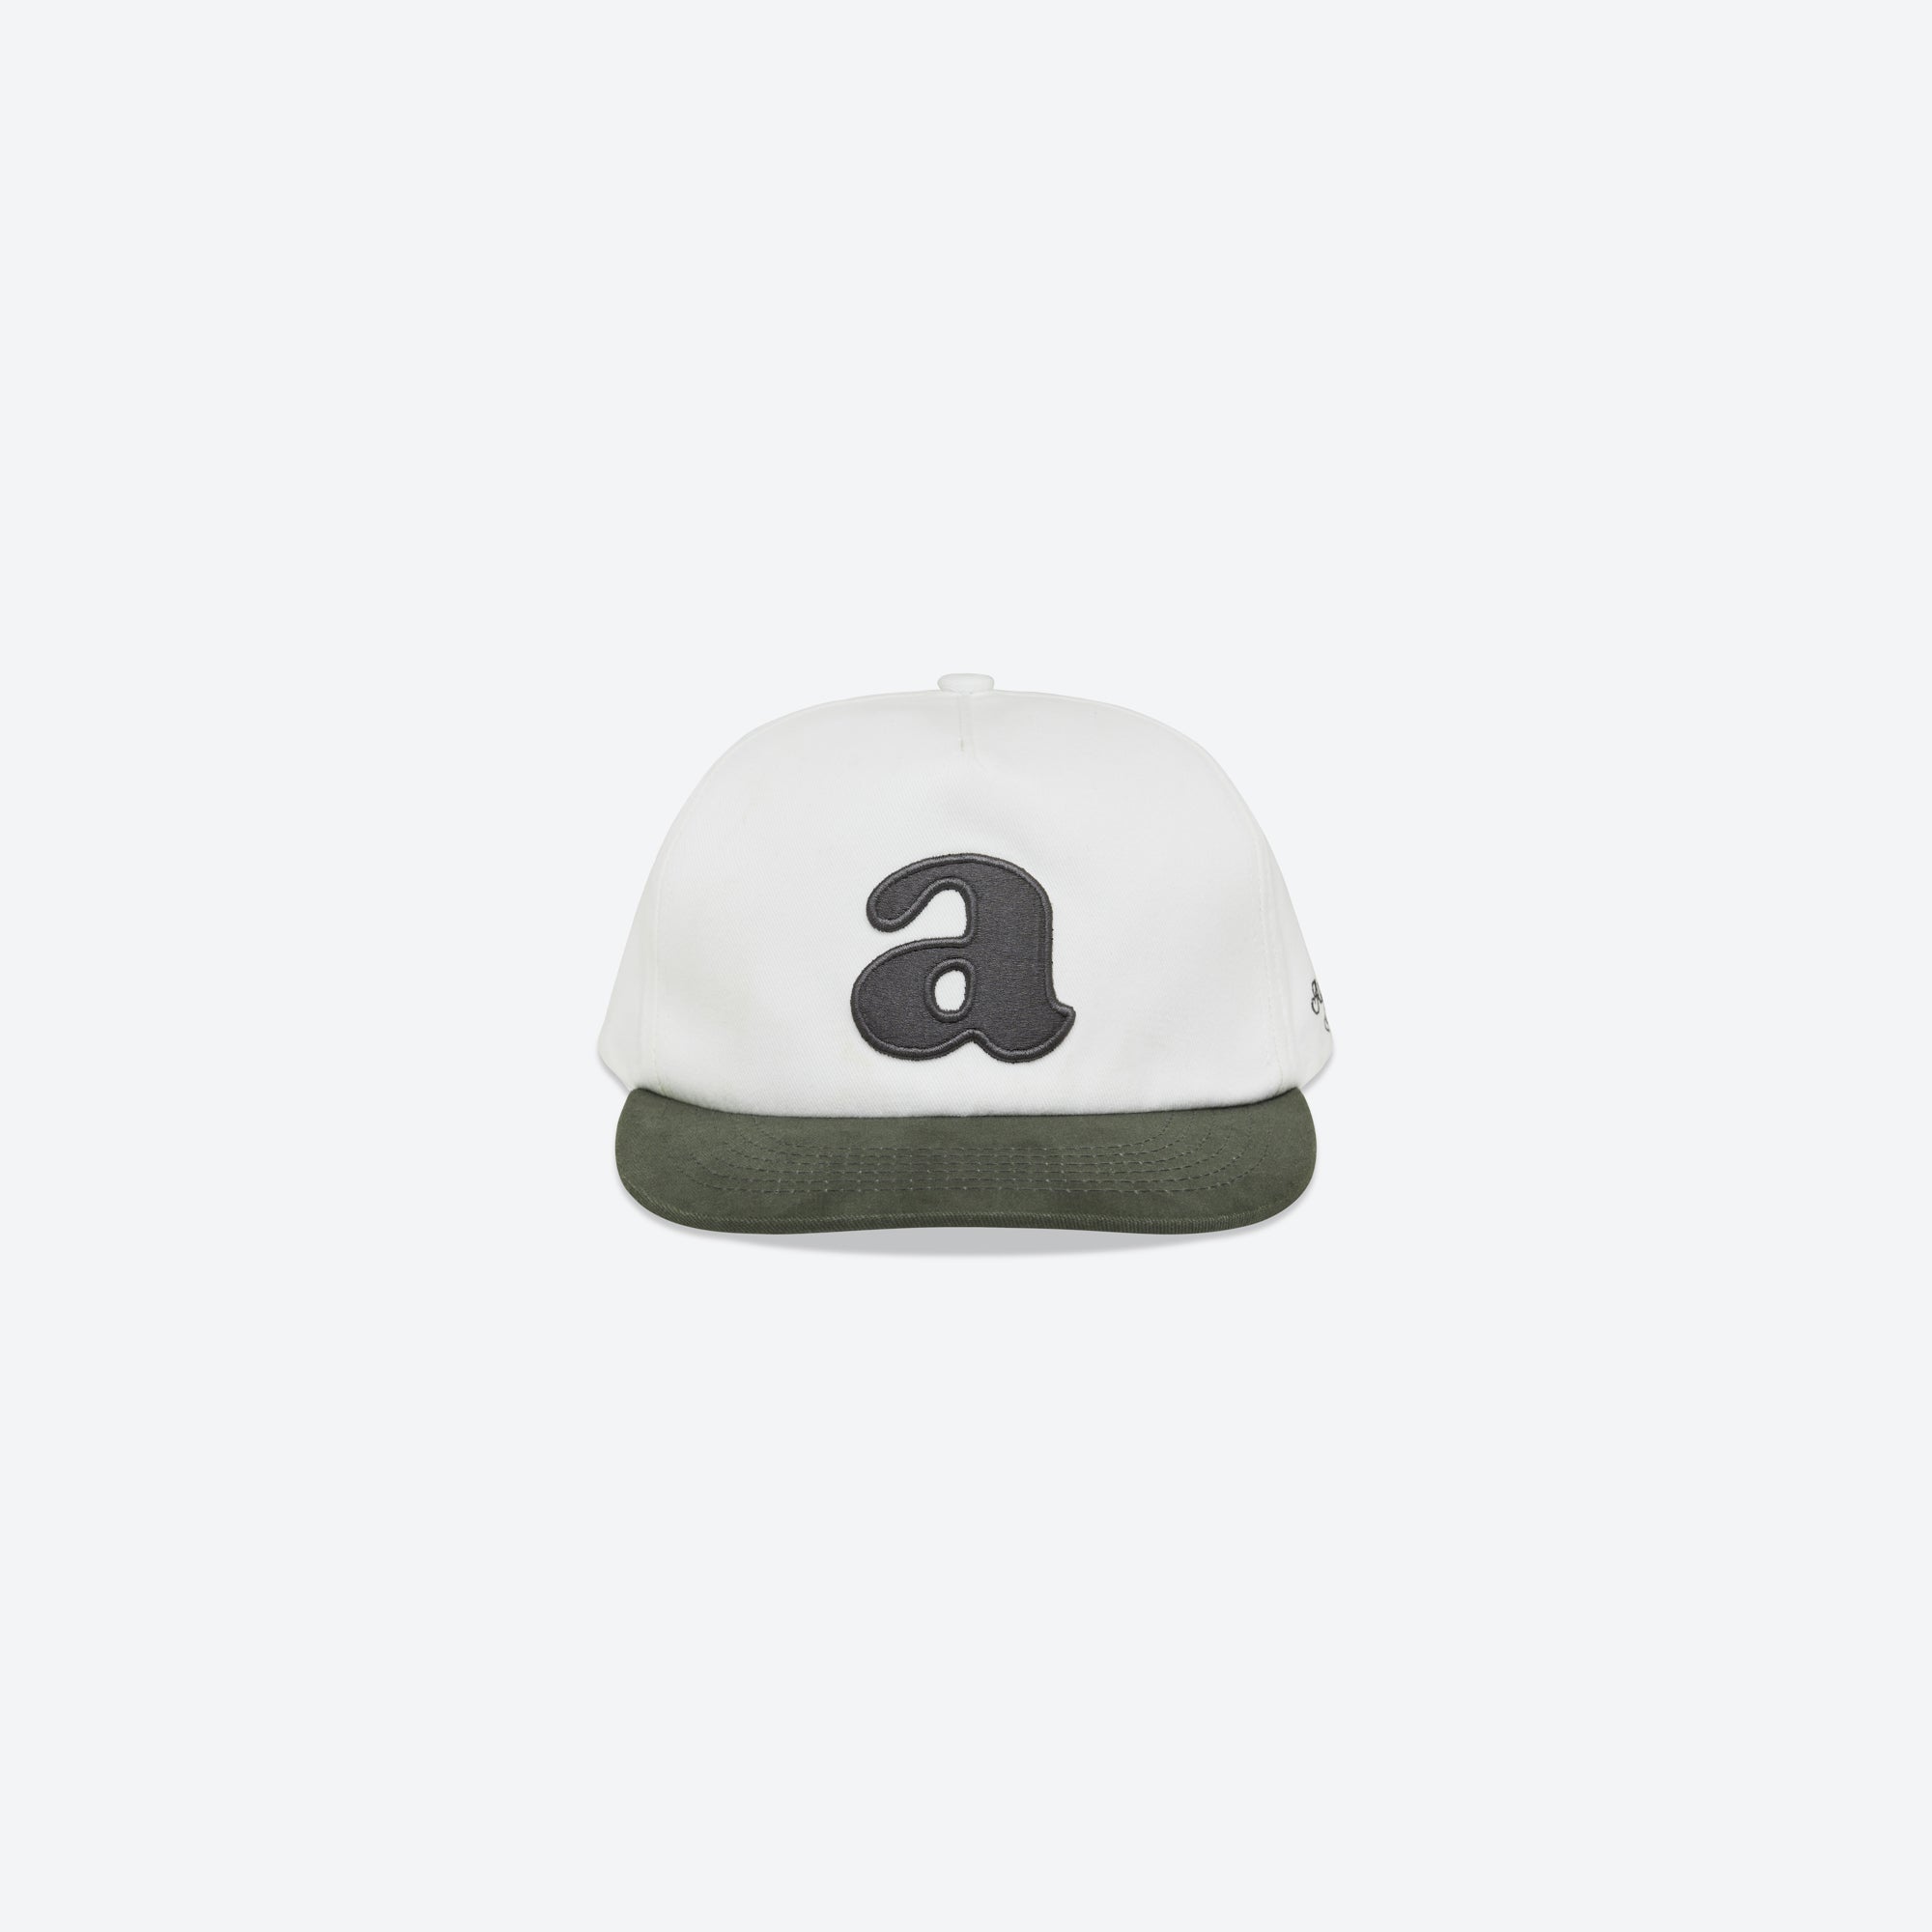 Alfred's Apartment - Stamp OG Cap - Off White / Charcoal